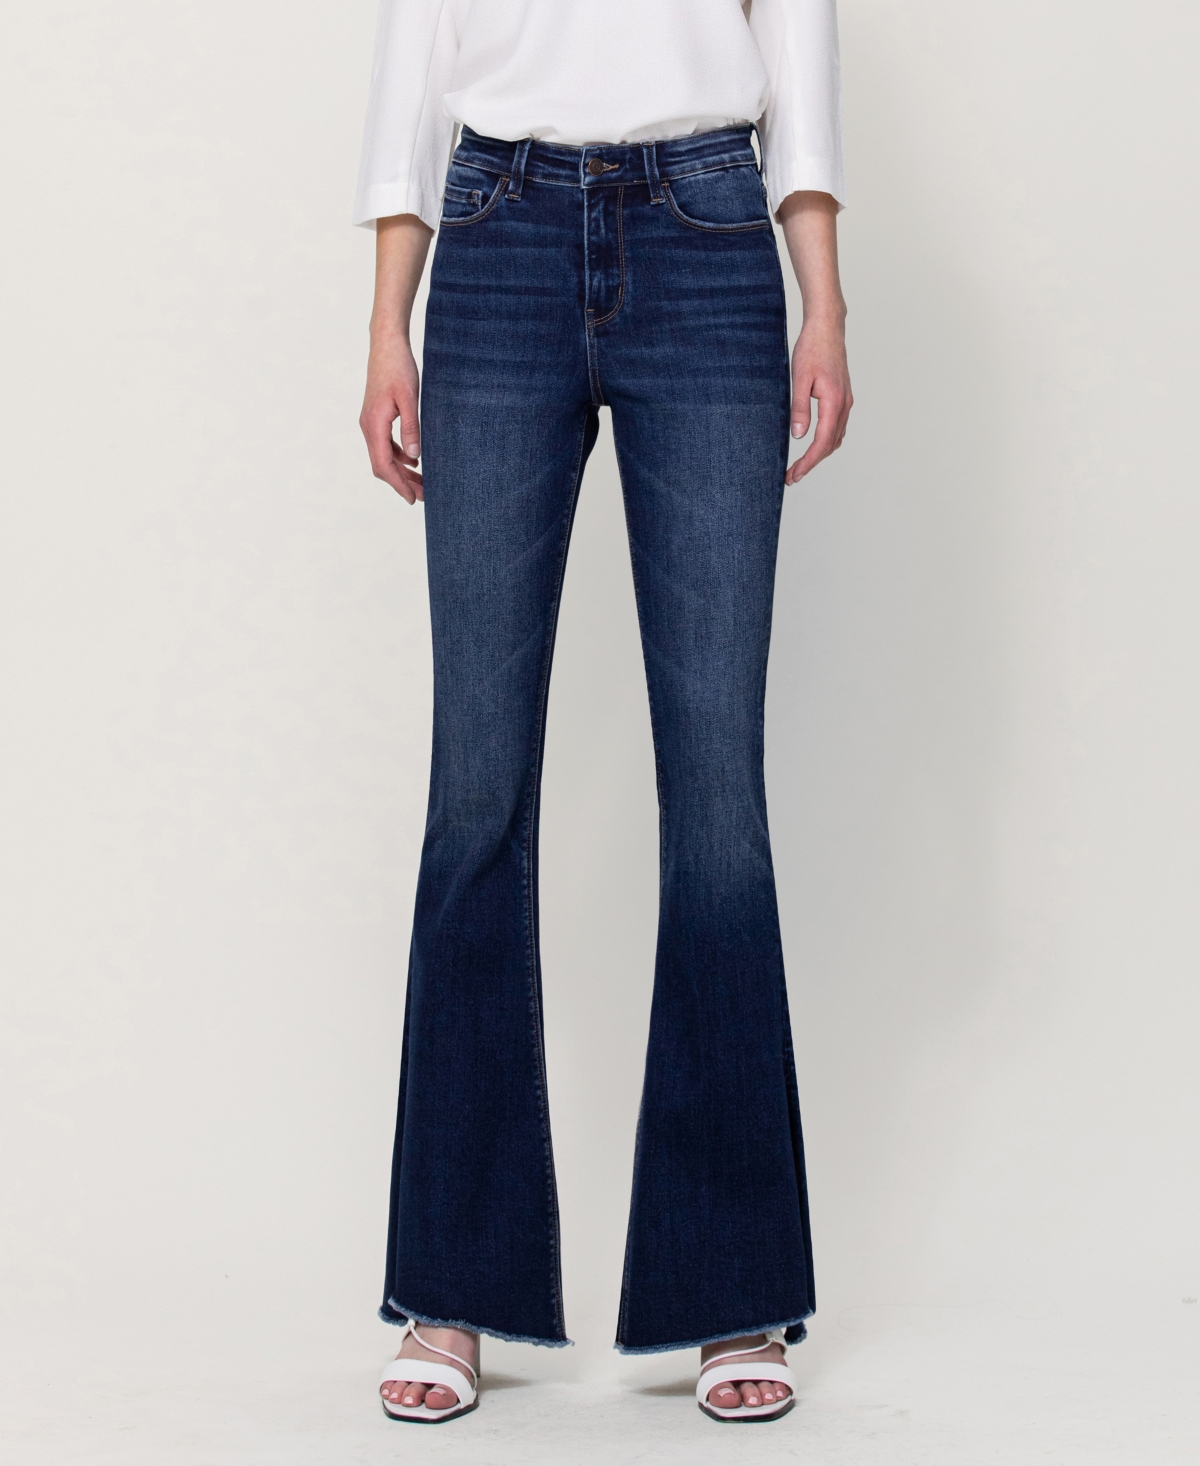  Women's High Rise Flare Jeans with Slit and Uneven Hem Detail